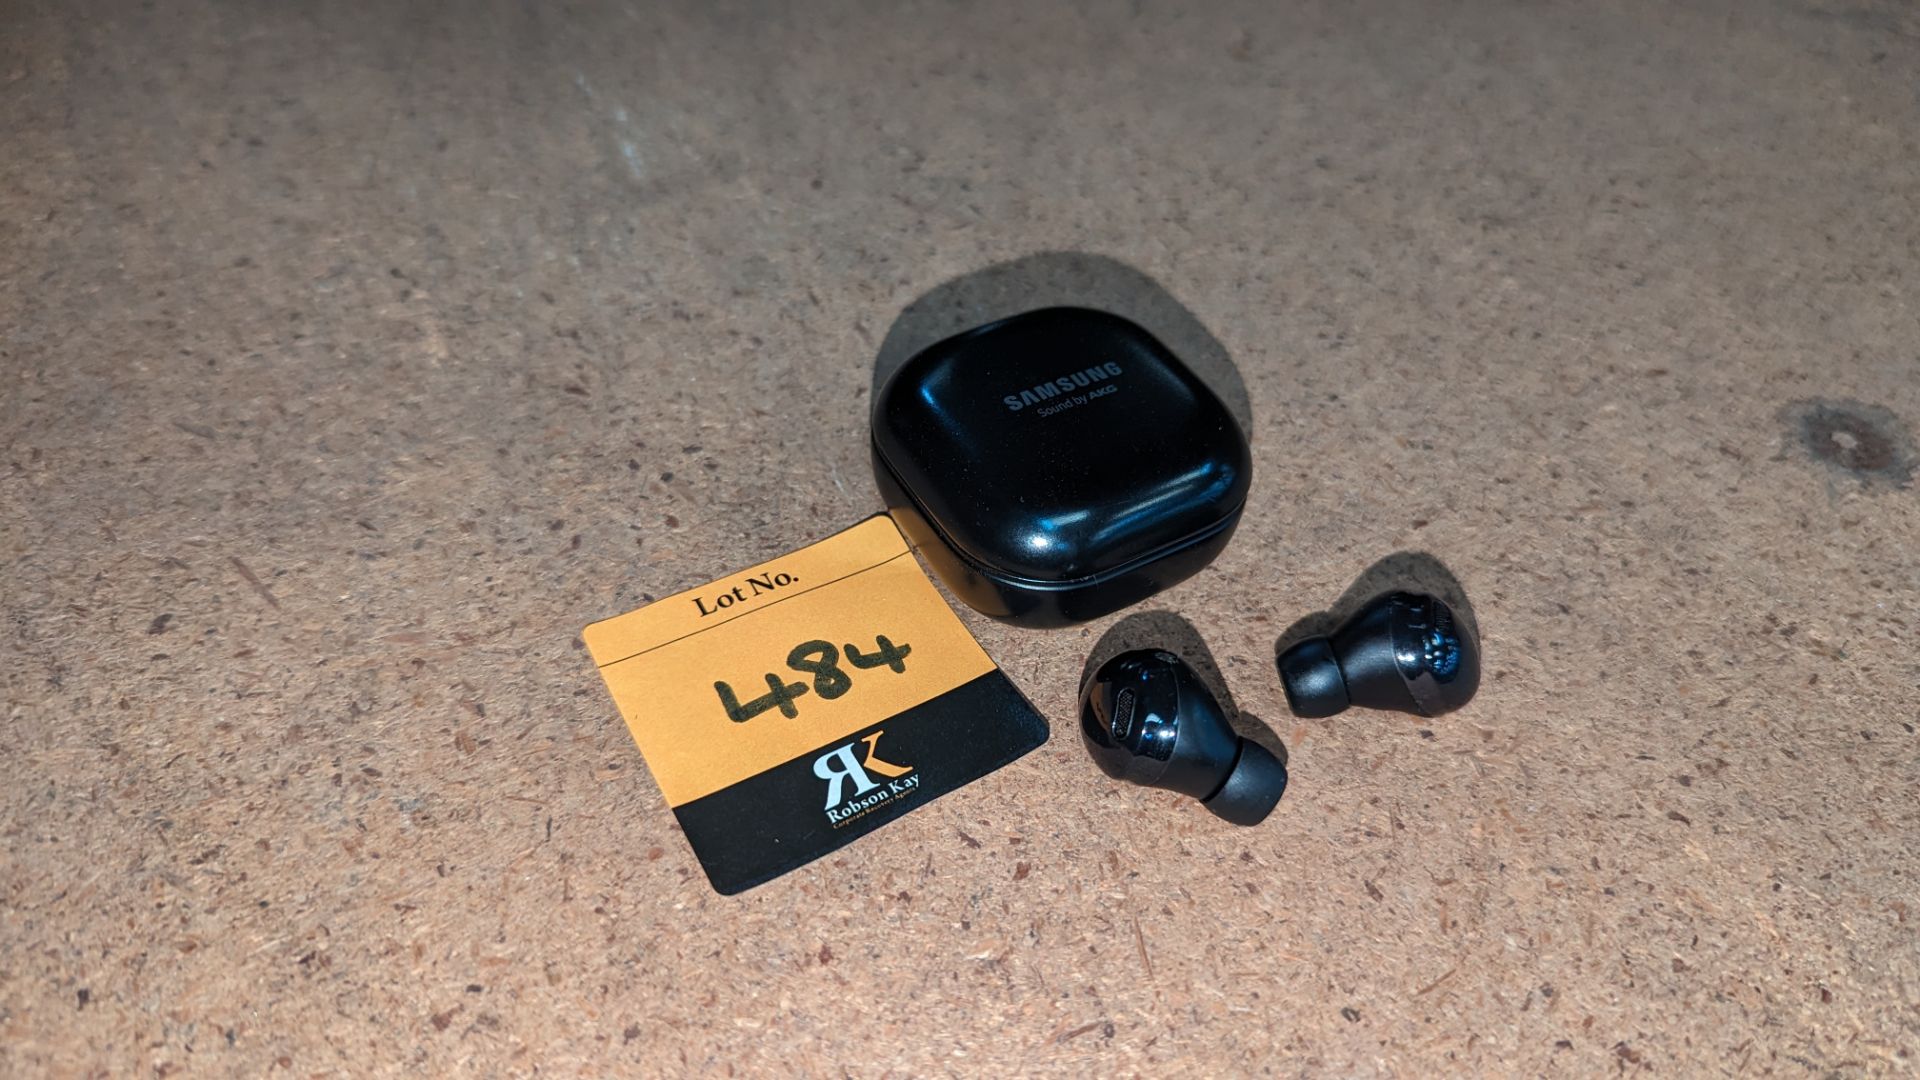 Samsung Galaxy Pro buds - no box or charger - Image 4 of 8